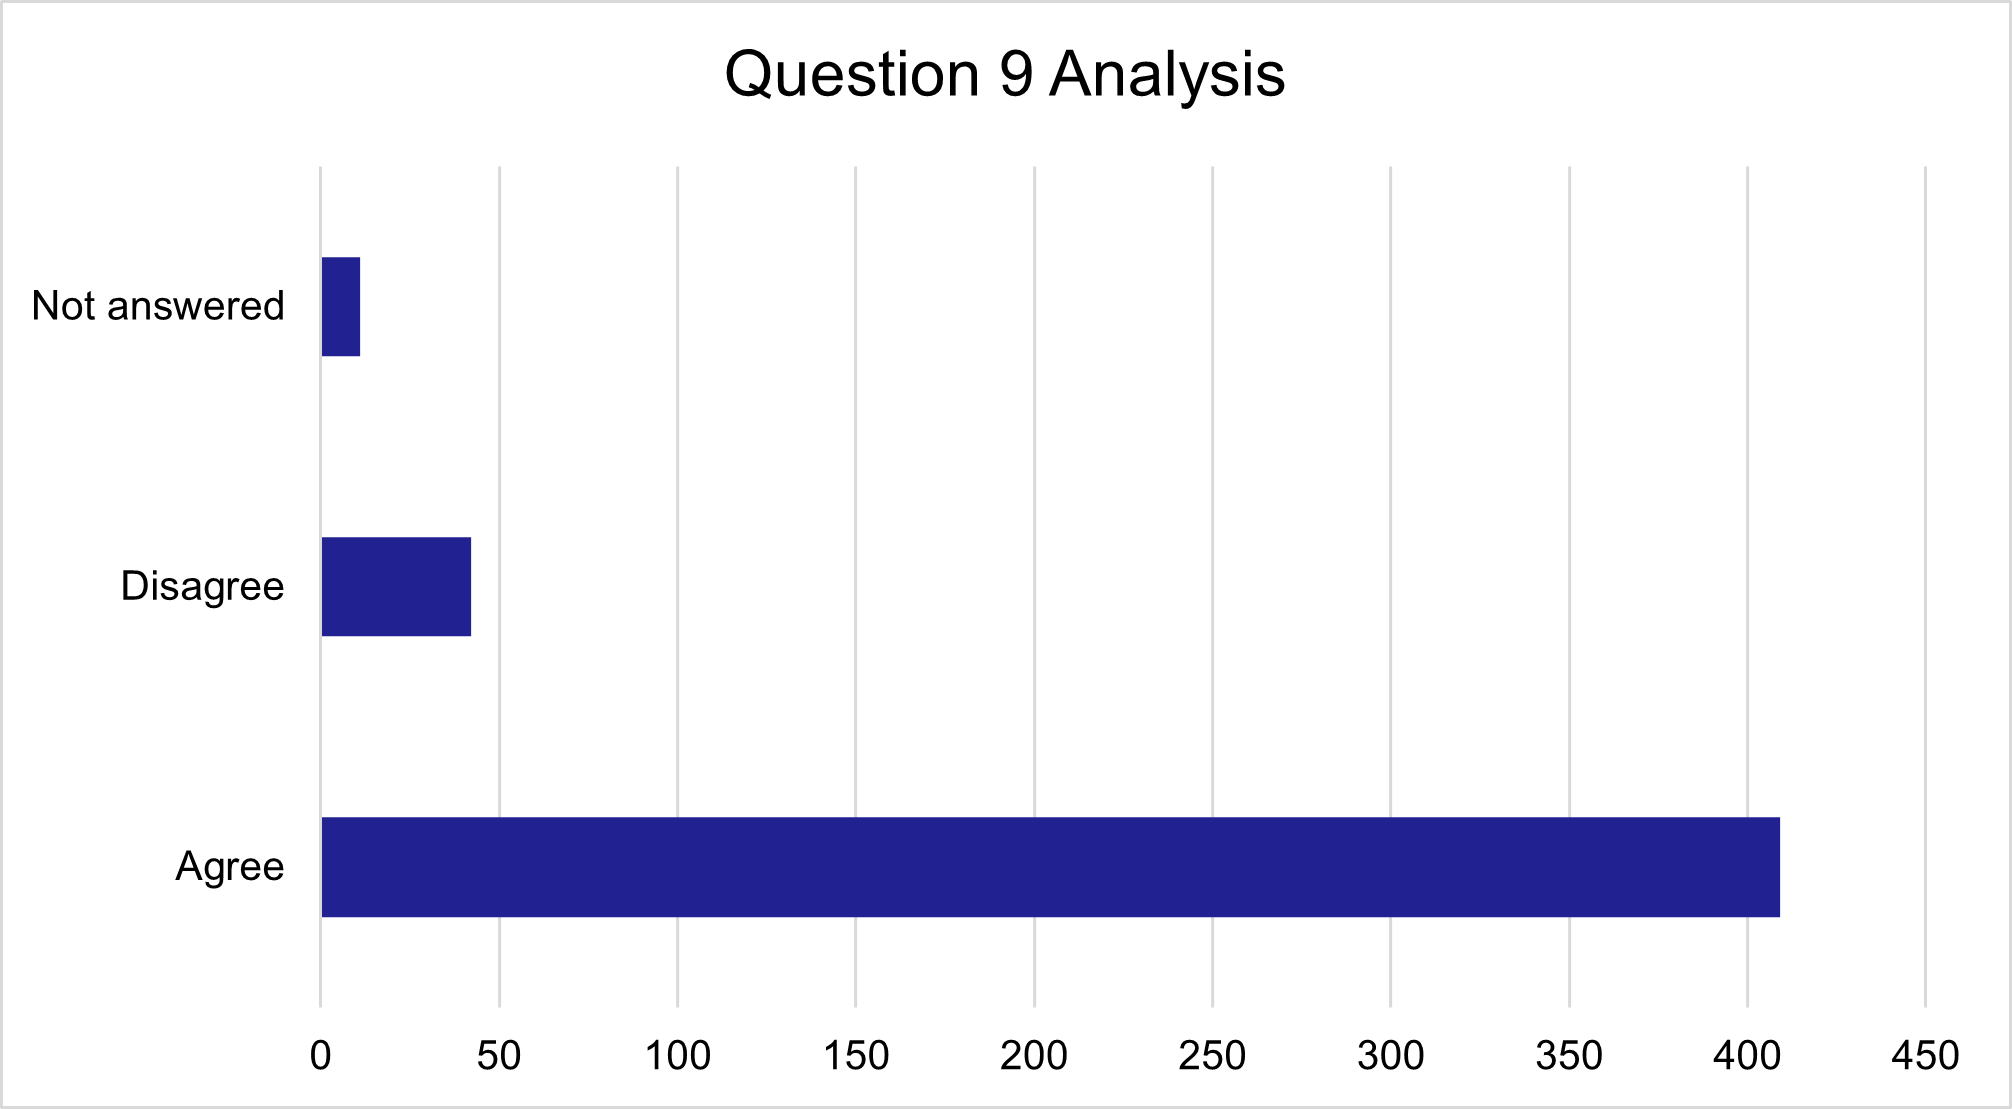 Question 9 responses, as described in text